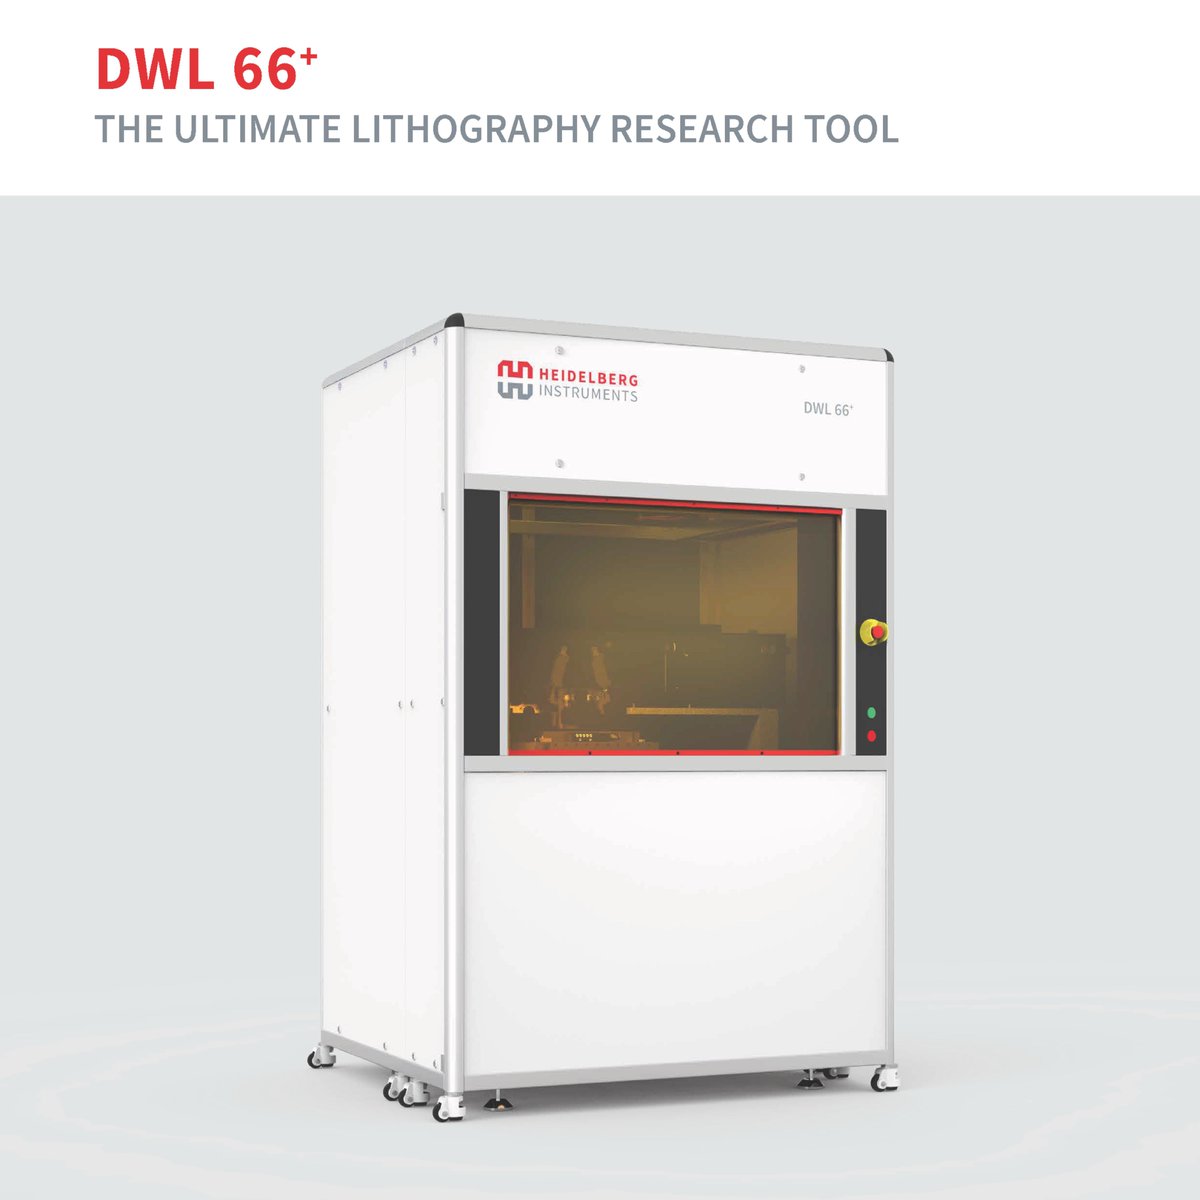 A new @3D_Lithography DWL66+ Maskless Laser Lithography System is Michigan bound! #SiliconCrossroads #microelectronics #nanofabrication #MicroelectronicsCommons #grayscale #masklesslithography